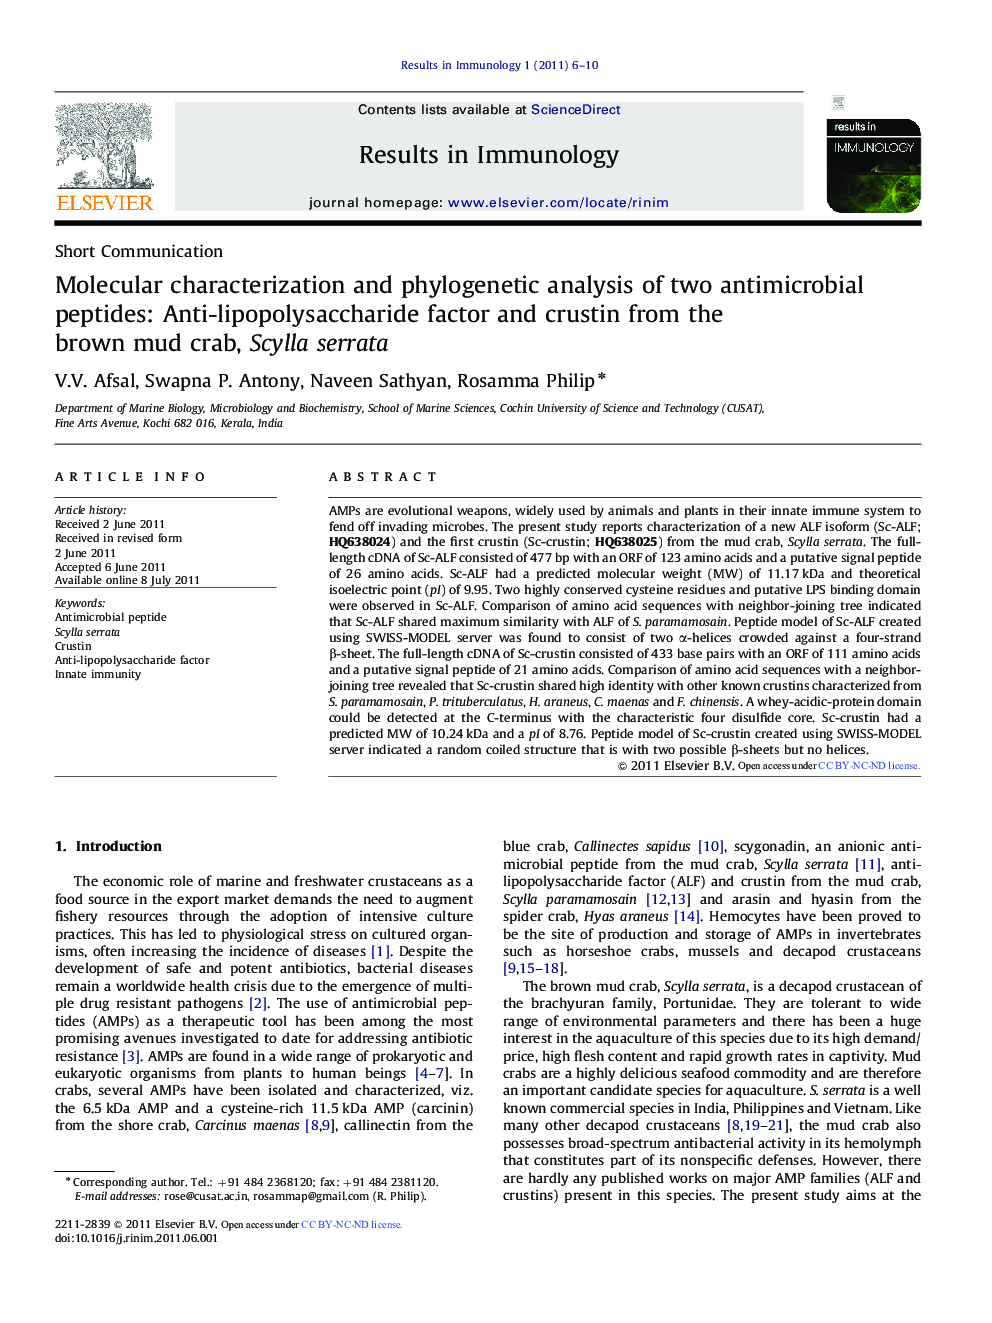 Molecular characterization and phylogenetic analysis of two antimicrobial peptides: Anti-lipopolysaccharide factor and crustin from the brown mud crab, Scylla serrata